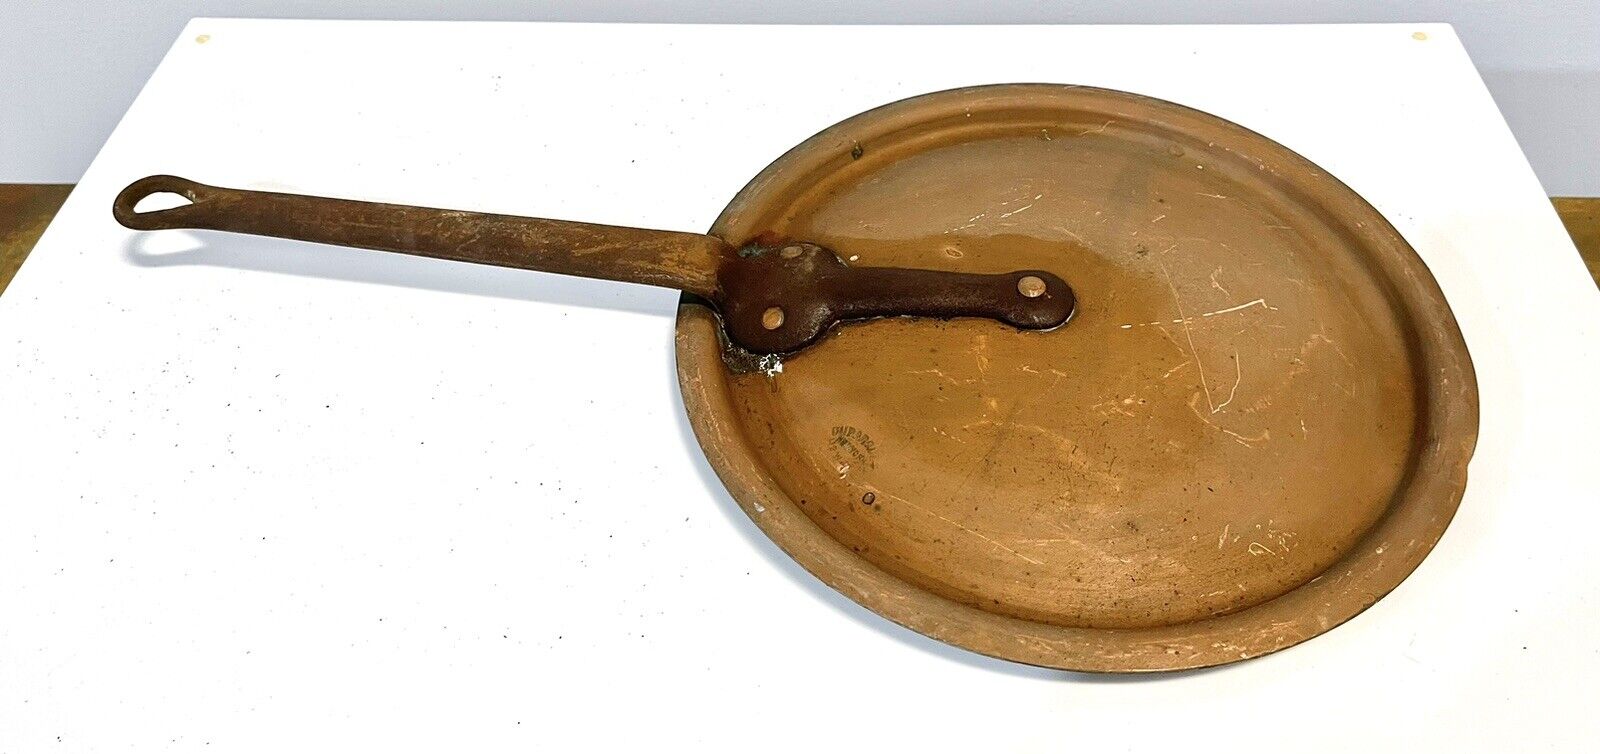 Antique Duparquet Copper Pan Or Pot Lid Only New York 110 W. 22nd St.  #14